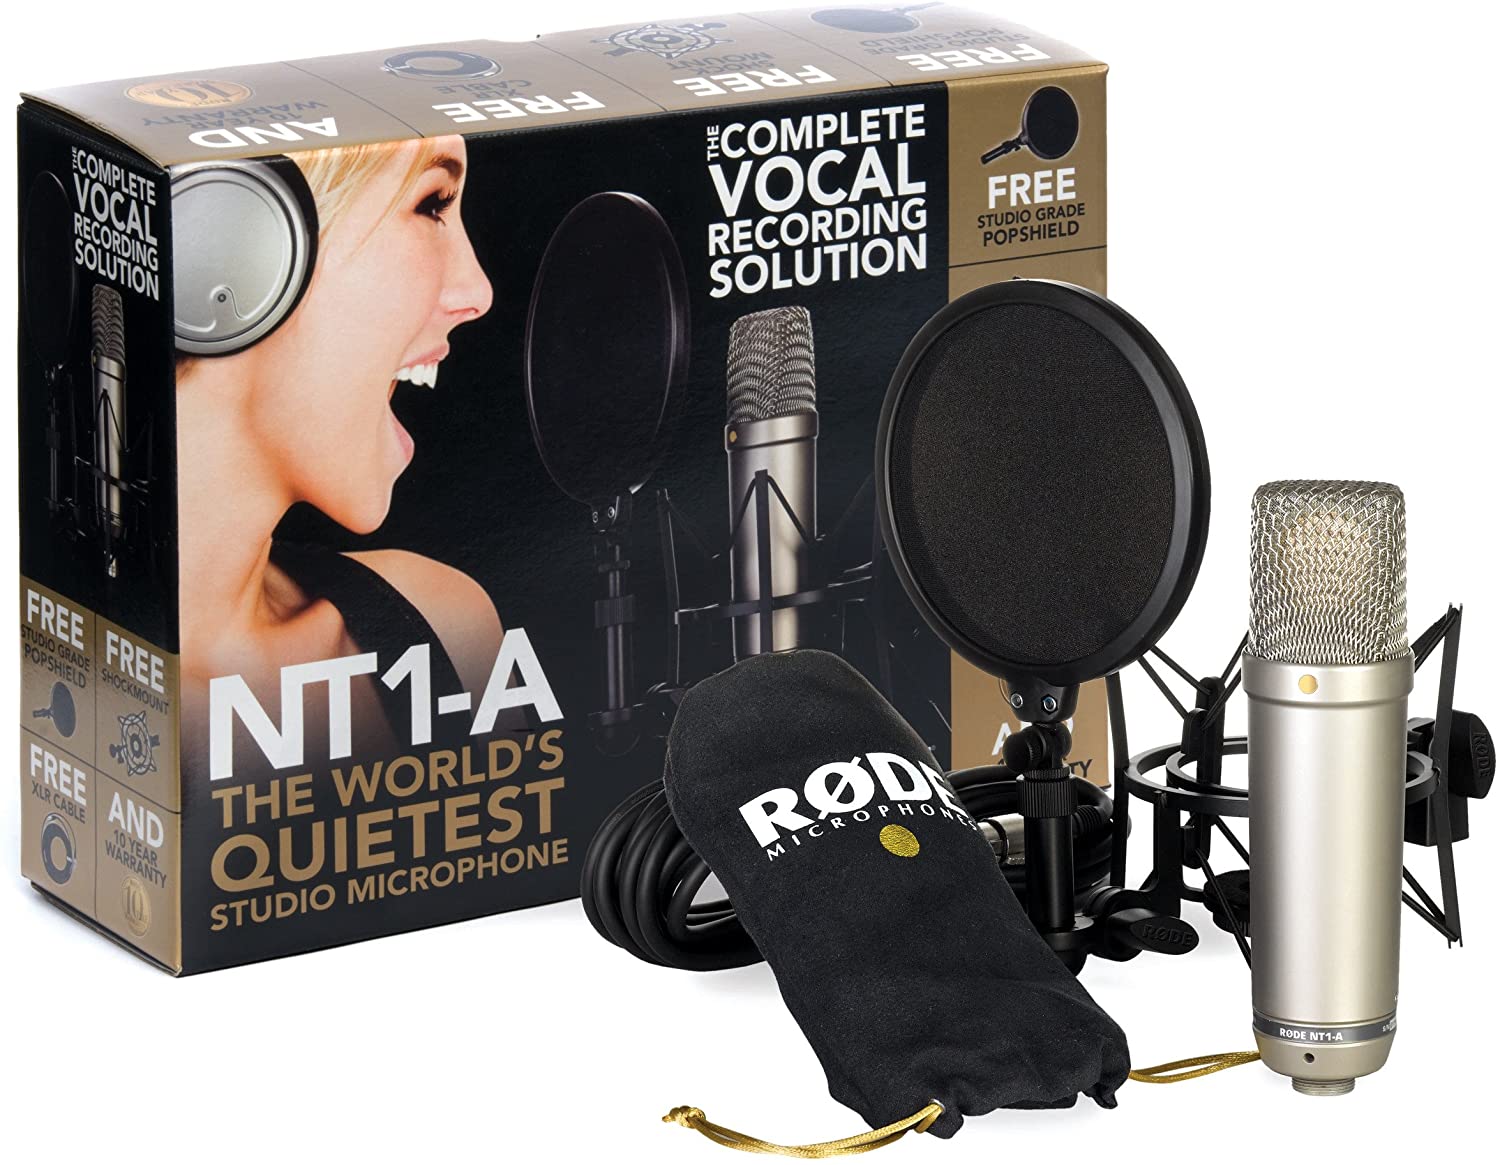 Rode NT1-A Anniversary Vocal Cardioid Condenser Microphone Package - Nepal  Music Gallery